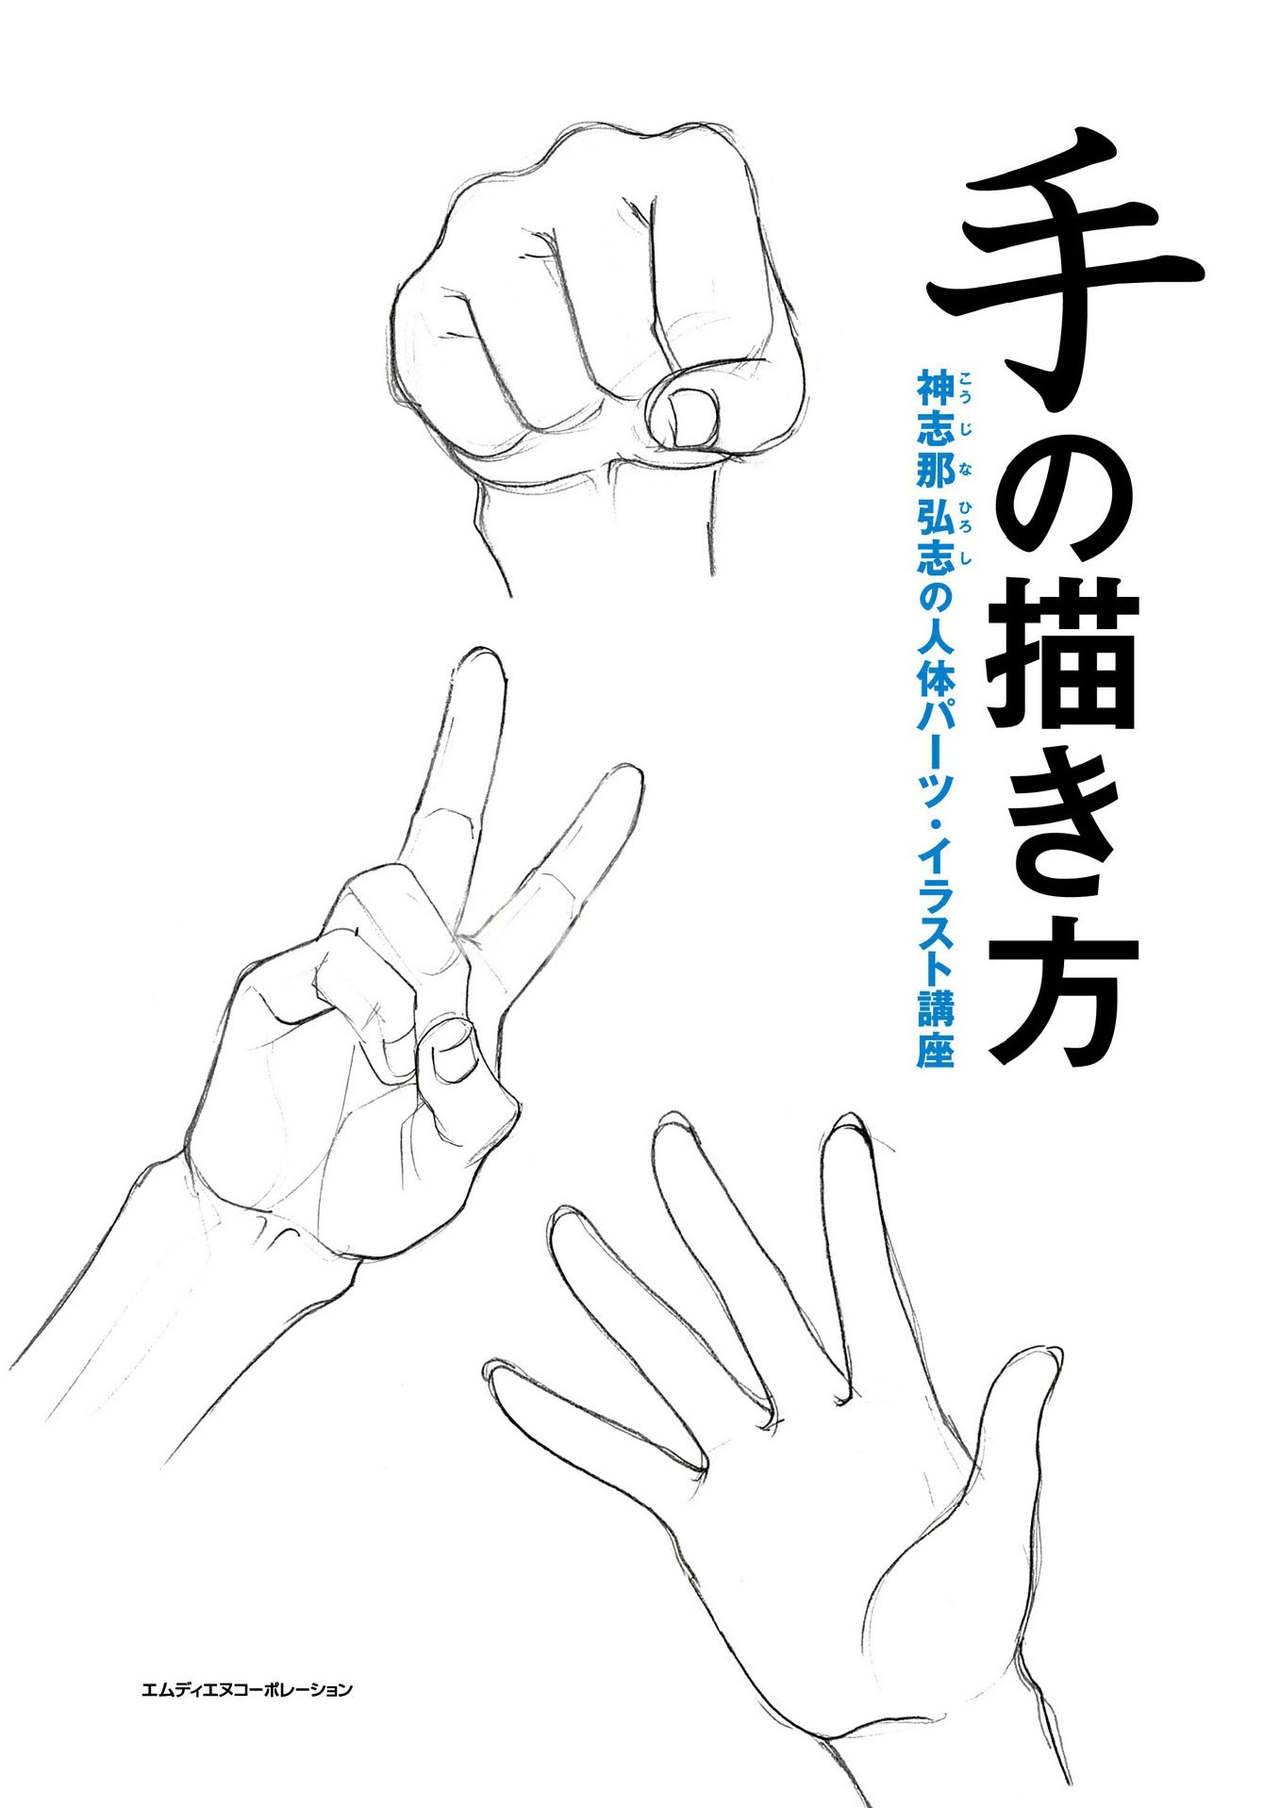 How to draw hands 1